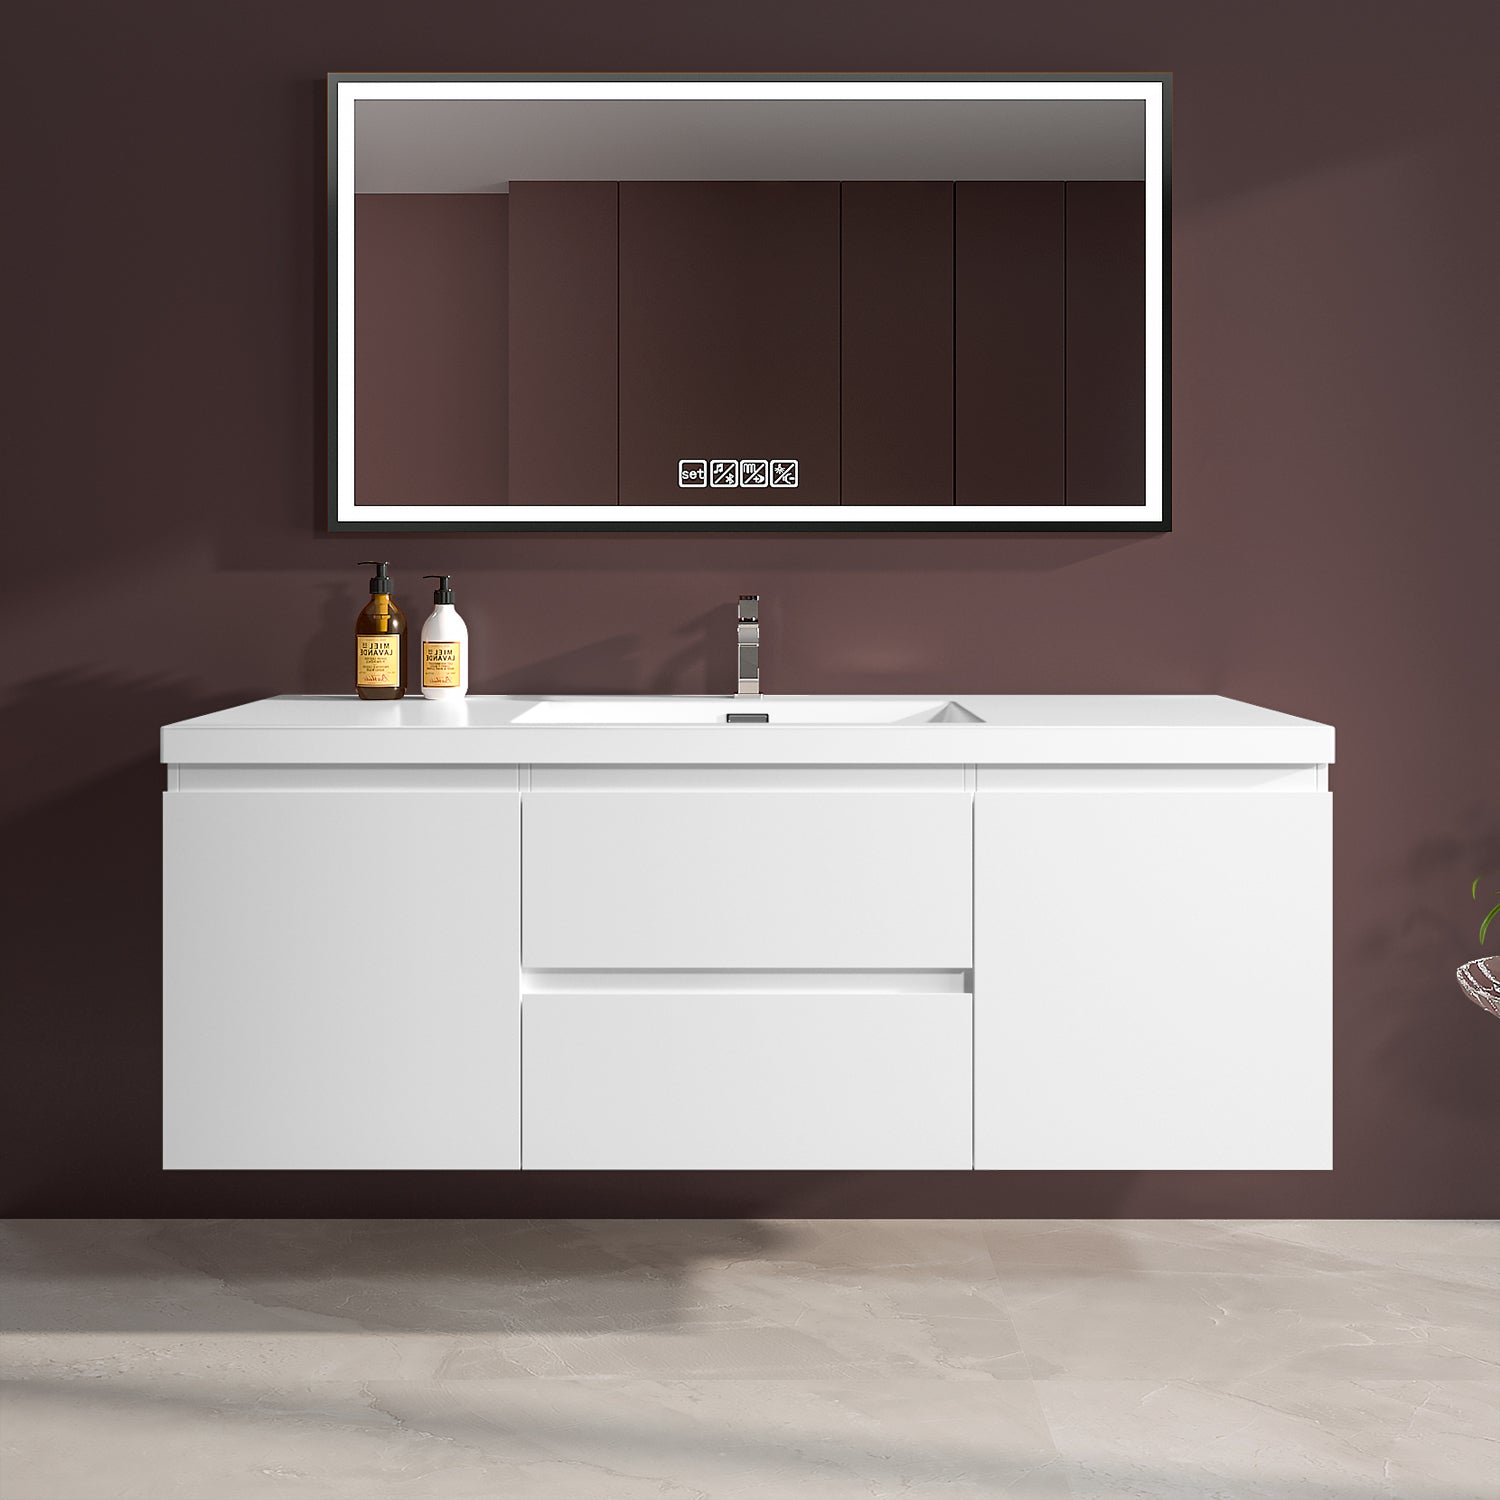 Sinber 60" Wall Mounted Single Rectangular Sink Bathroom Vanity Cabinet with White Acrylic Countertop 2 Doors and 2 Drawers, Compact and Elegant with Sleek Design for Modern Bathrooms